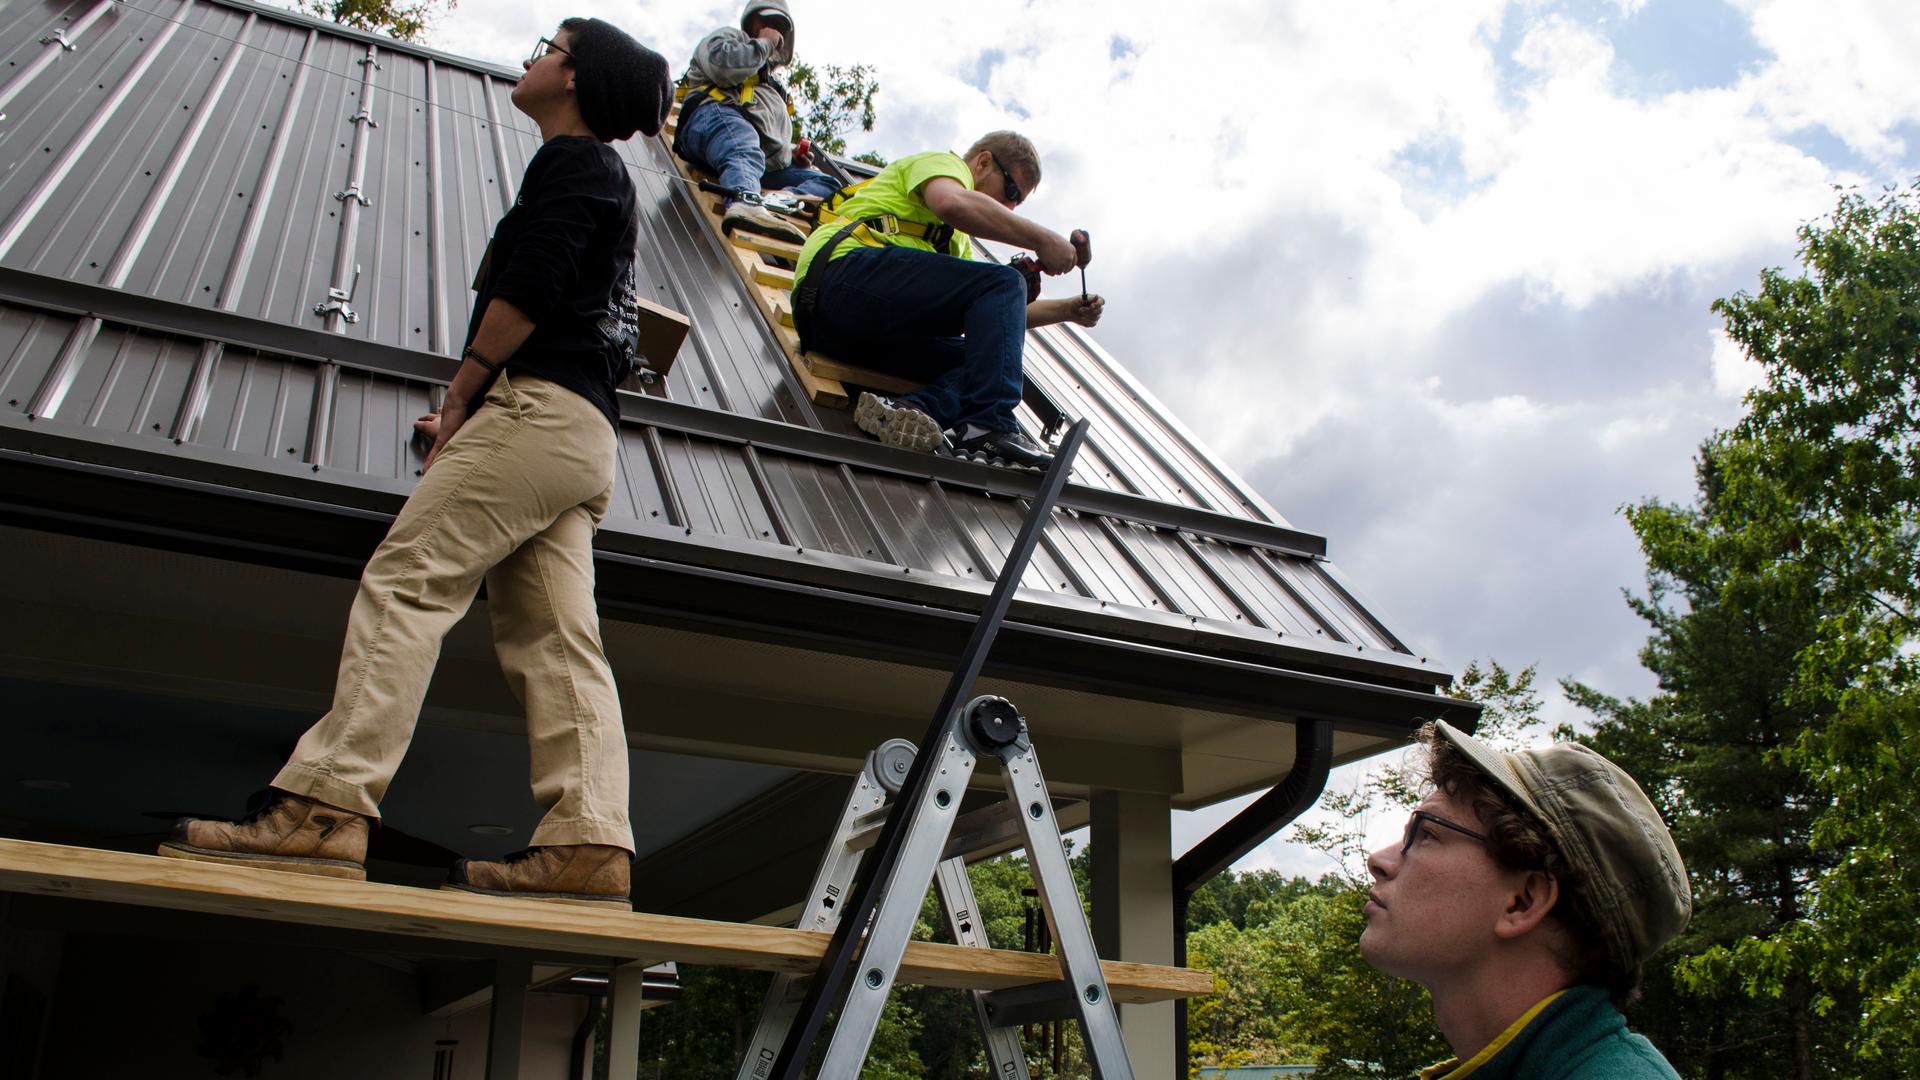 Solar Holler founder Dan Conant, foreground, looks on at the beginning of a solar roof installation in Lewisburg, West Virginia. 